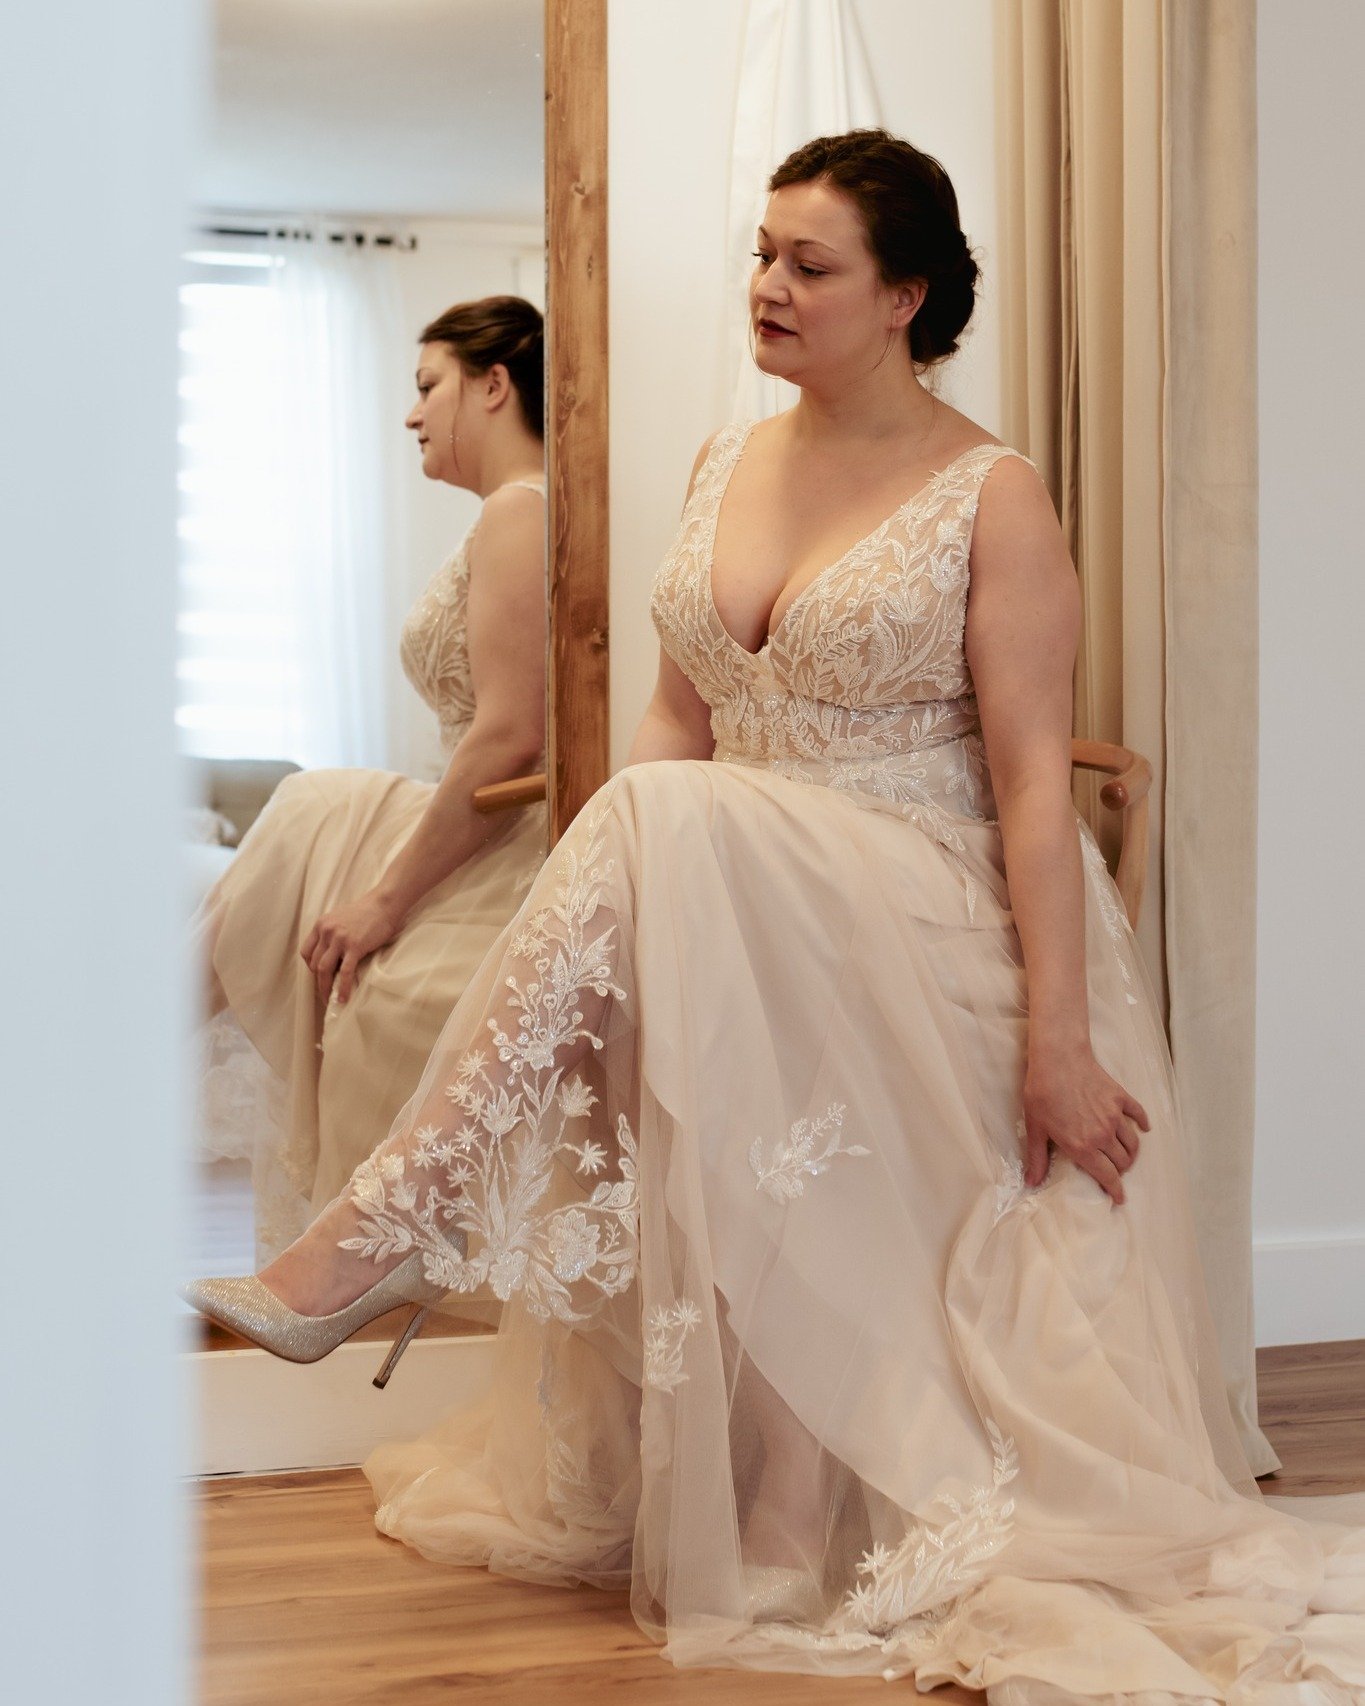 🤍 Happy Saturday!!! Bon Samedi!!!
...
How beautiful is Samantha in this whimsical wedding dress from Maggie Sottero? We cannot wait to see the magic that will be beginning in this fitting room today!!! / Samantha est tellement belle dans cette robe 